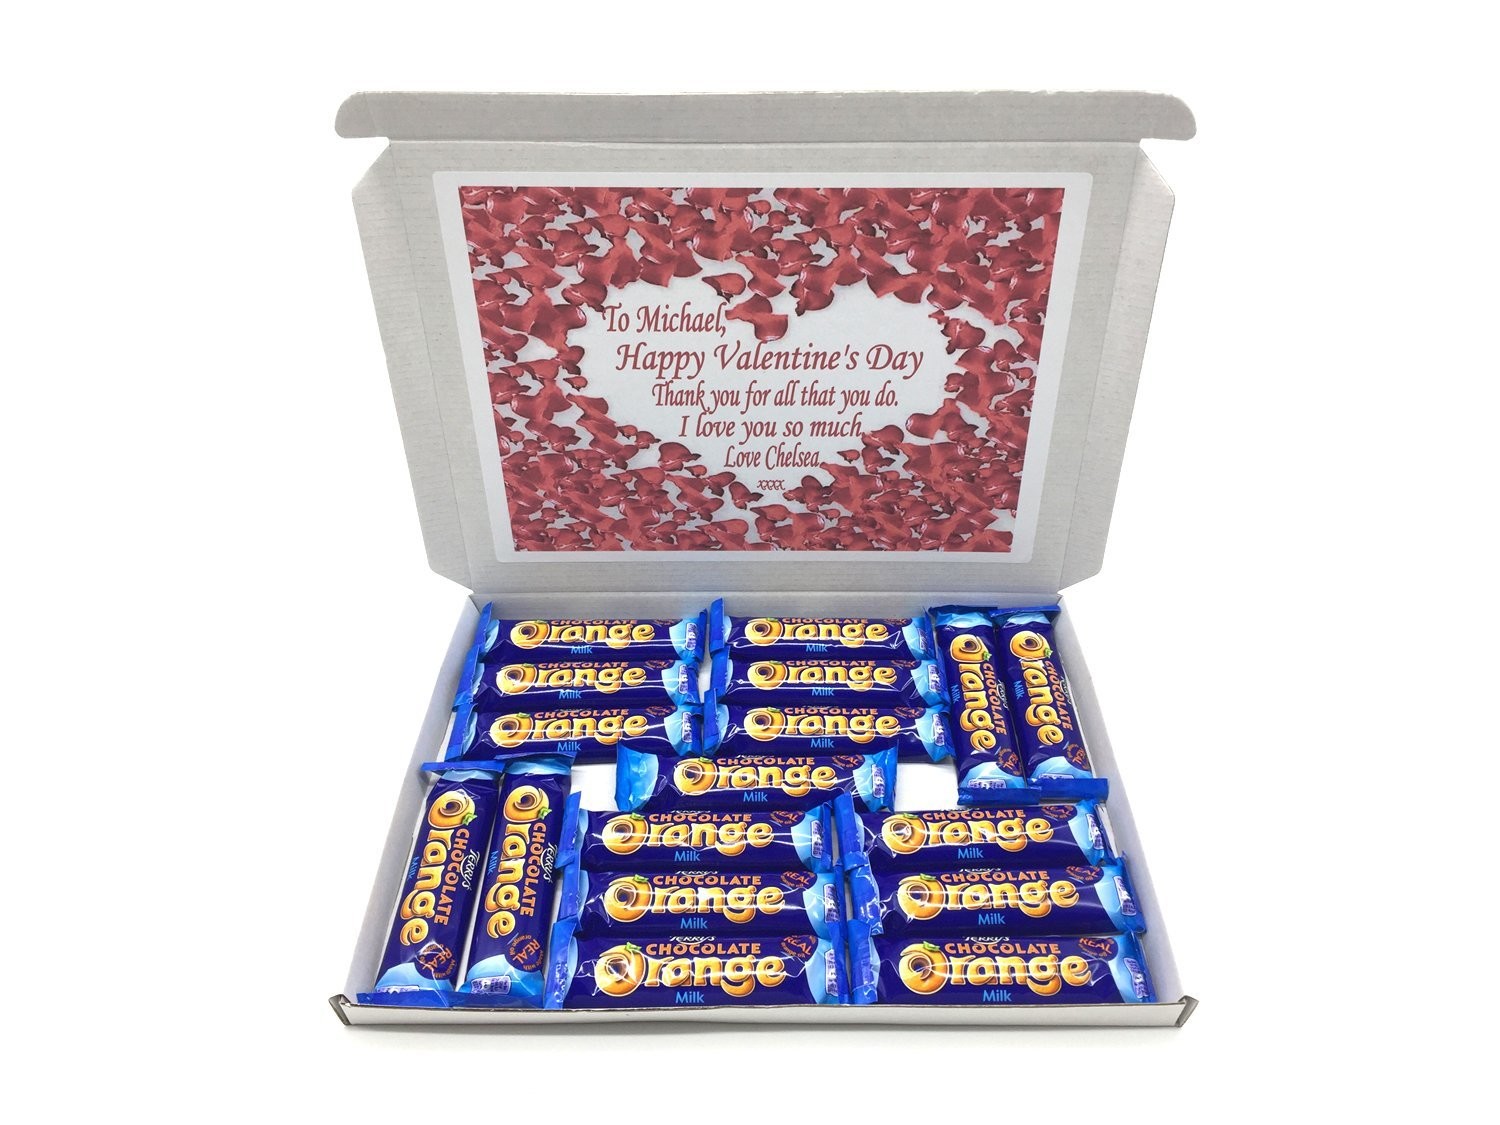 Terry's Chocolate Orange Gift box | Personalised | By Charlotte